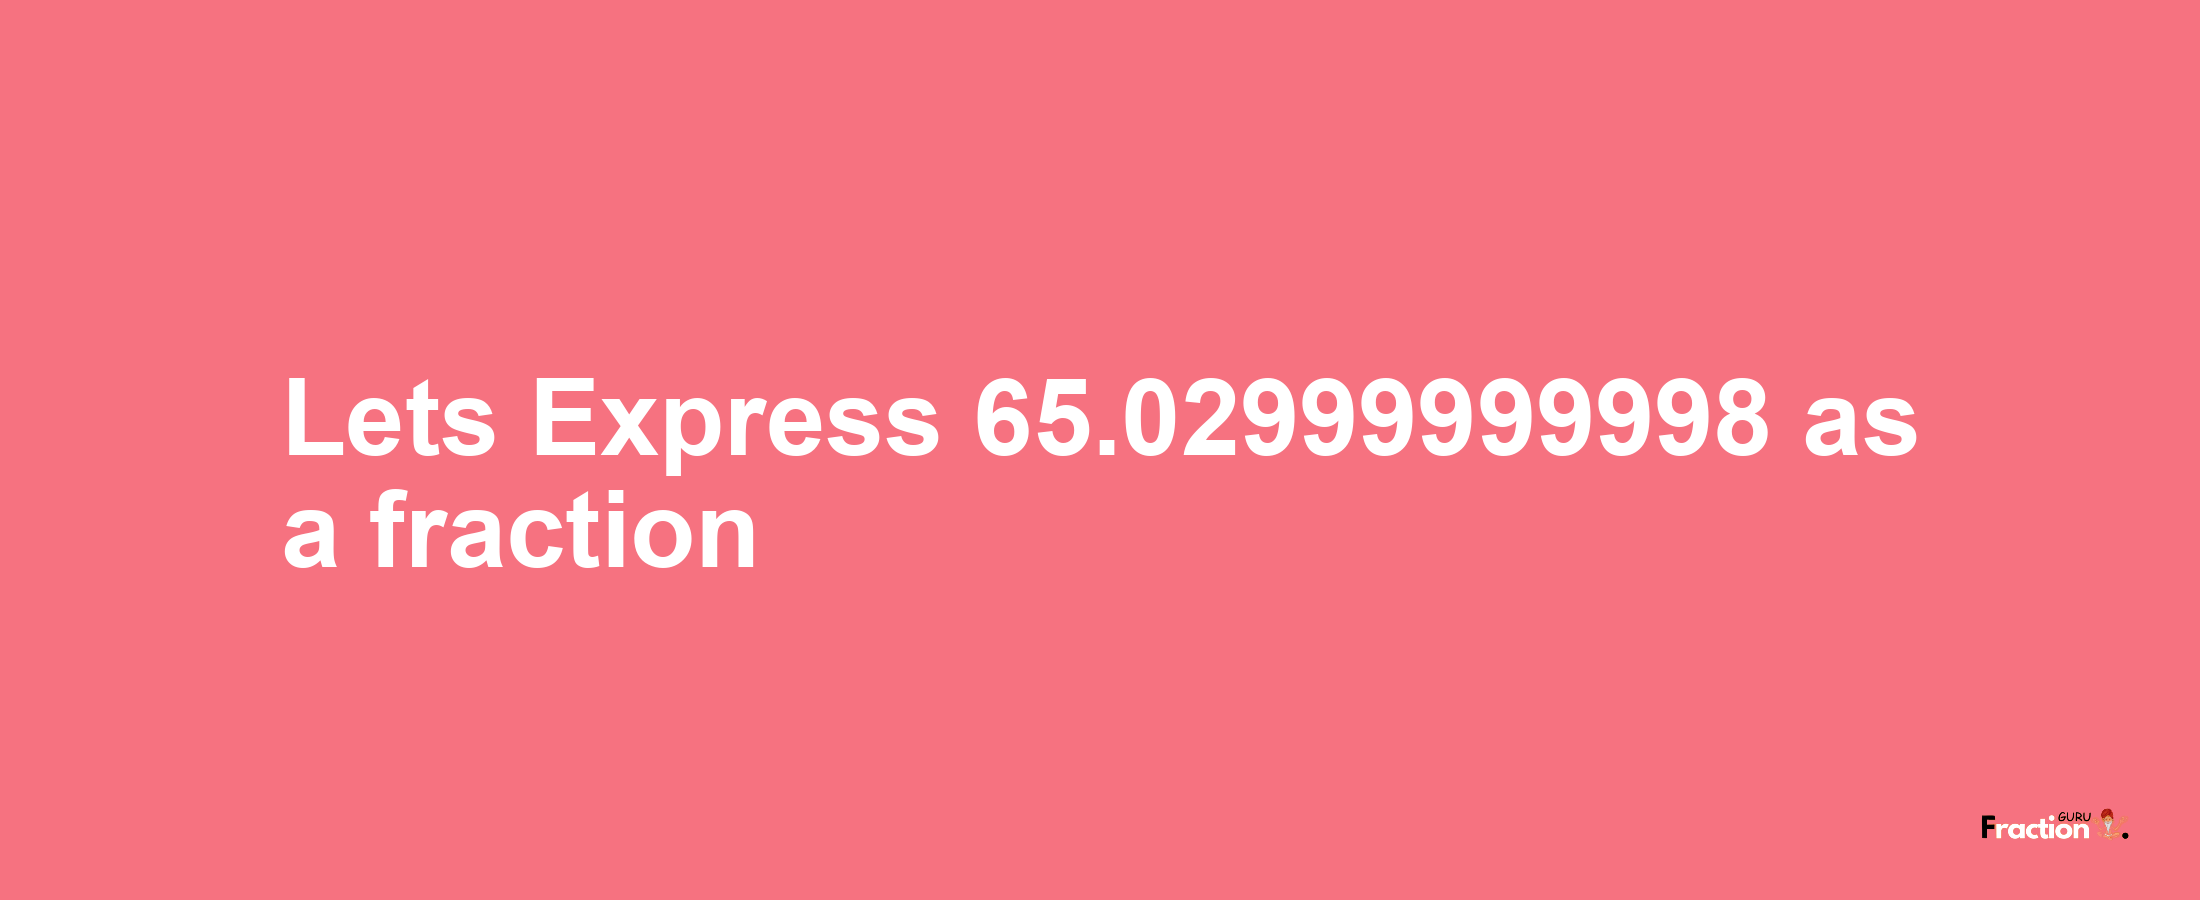 Lets Express 65.02999999998 as afraction